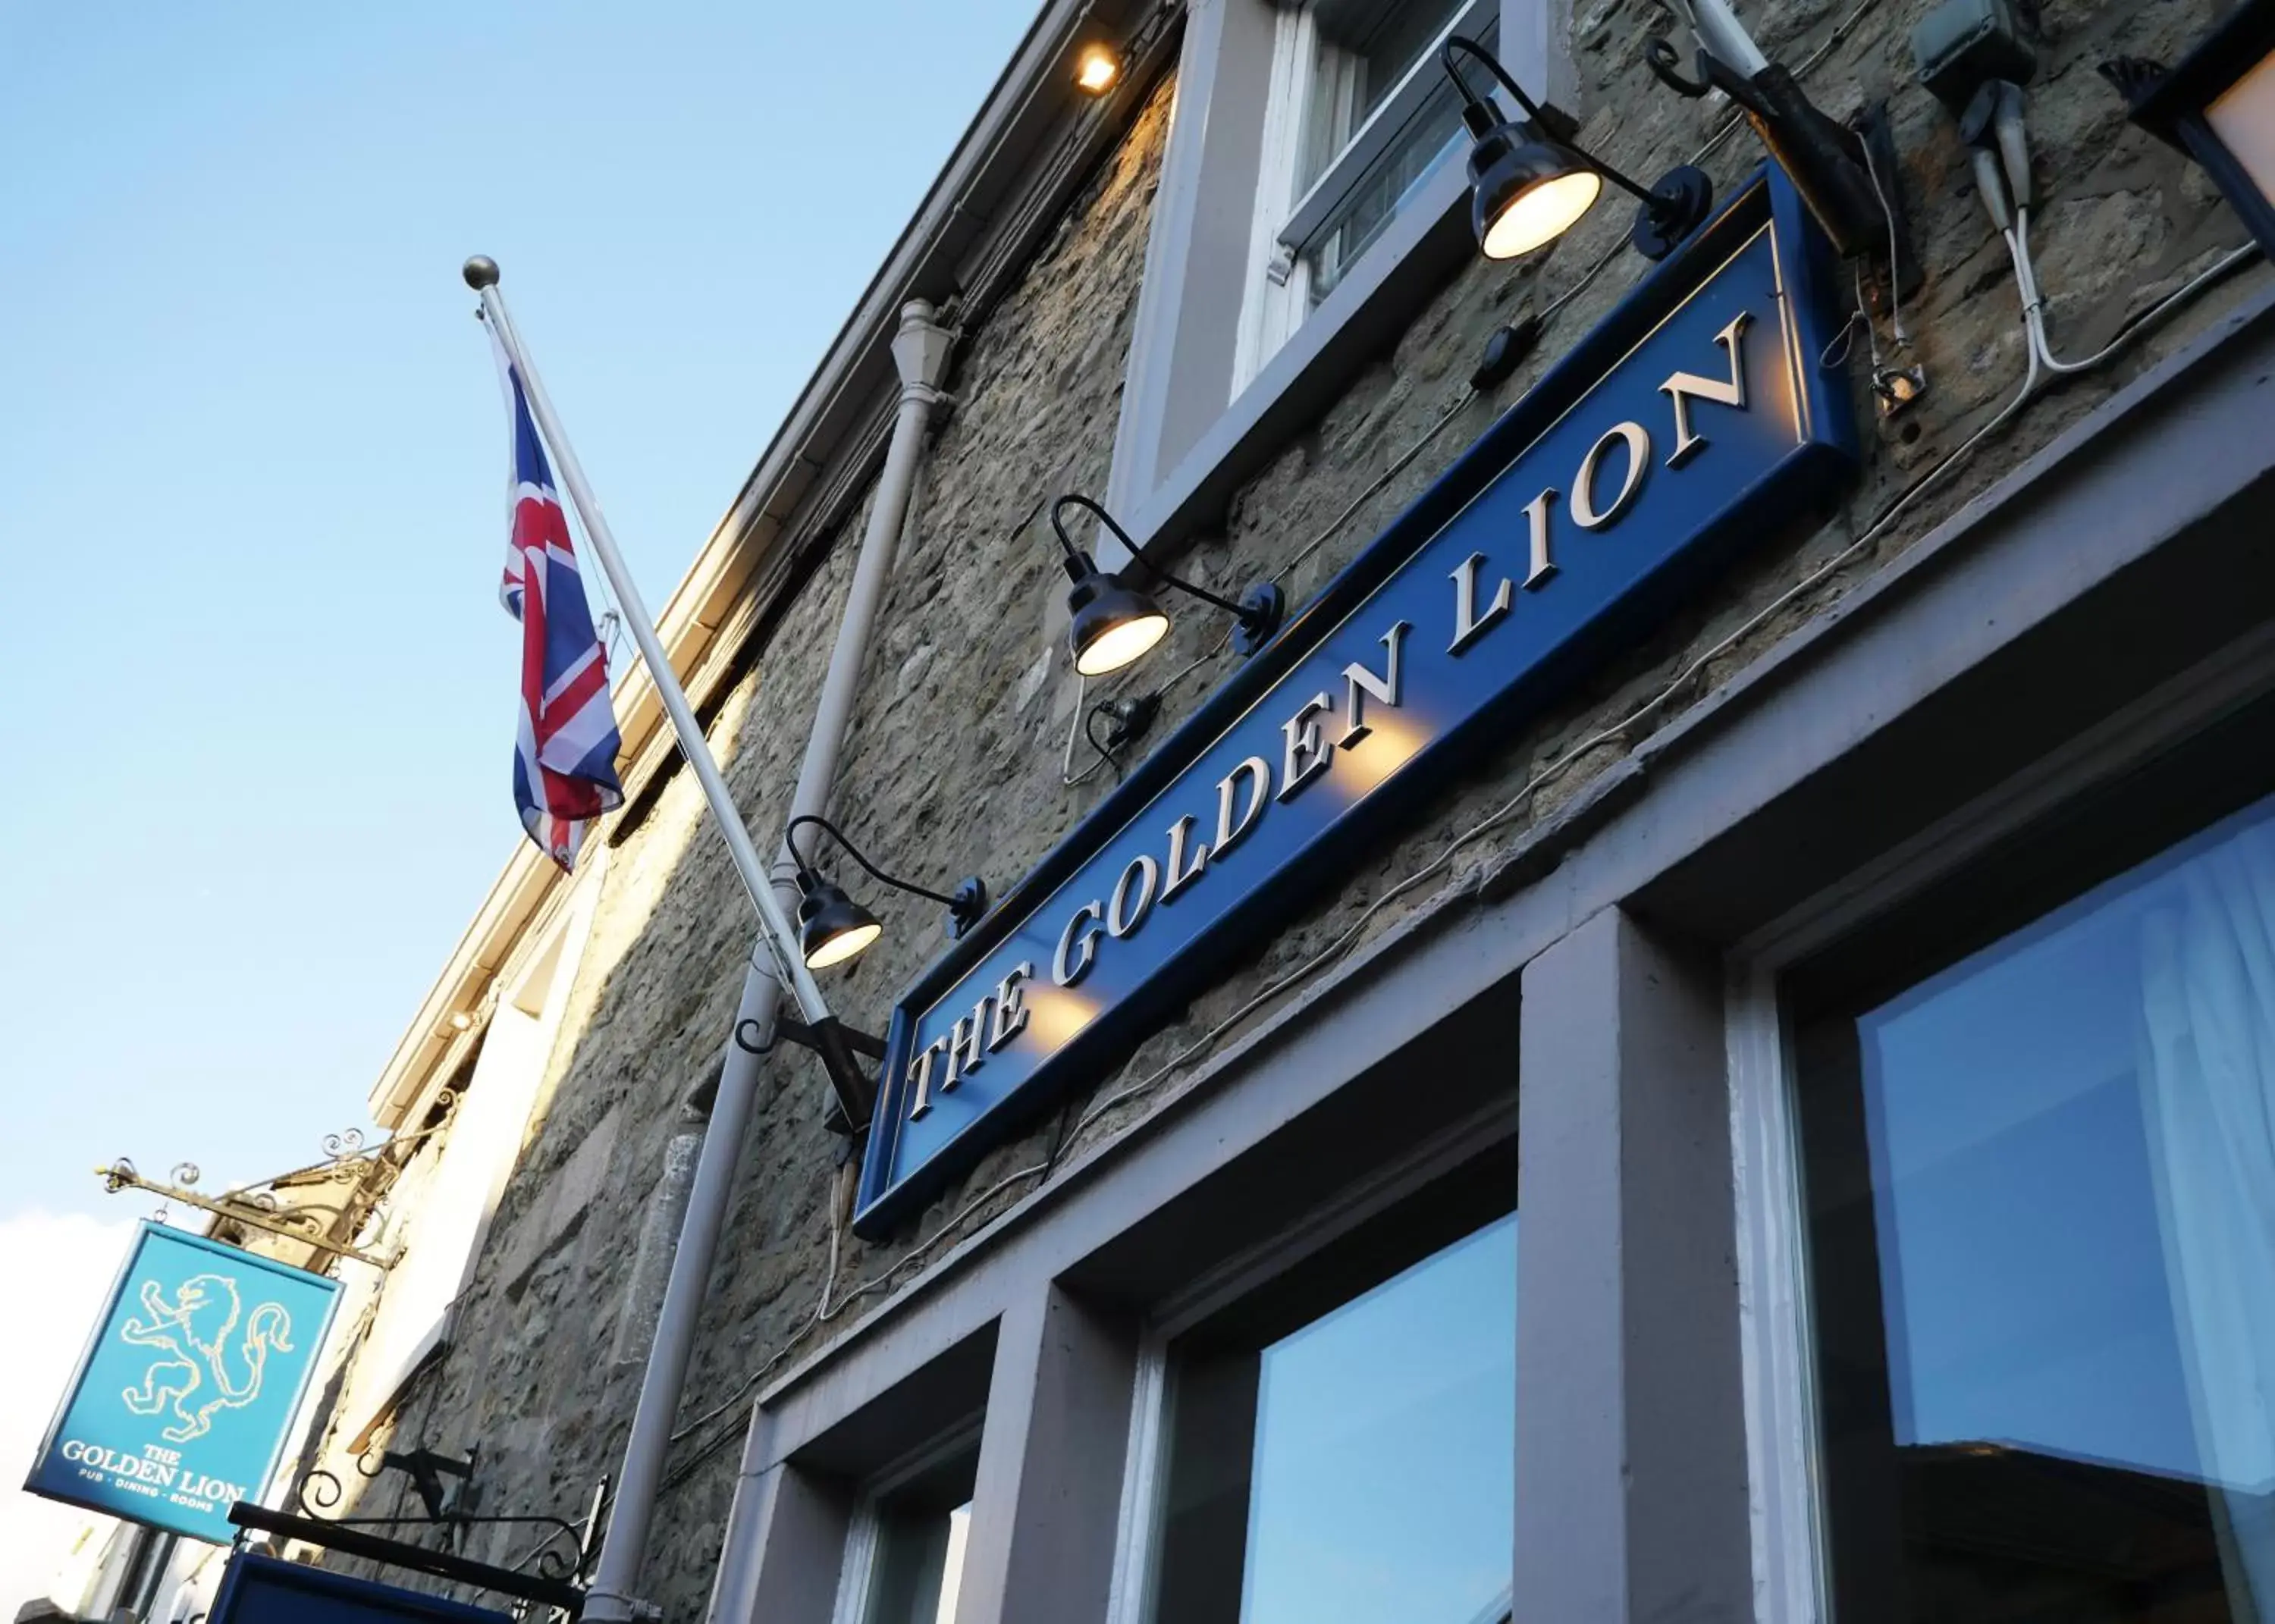 Facade/entrance, Property Building in The Golden Lion at Settle